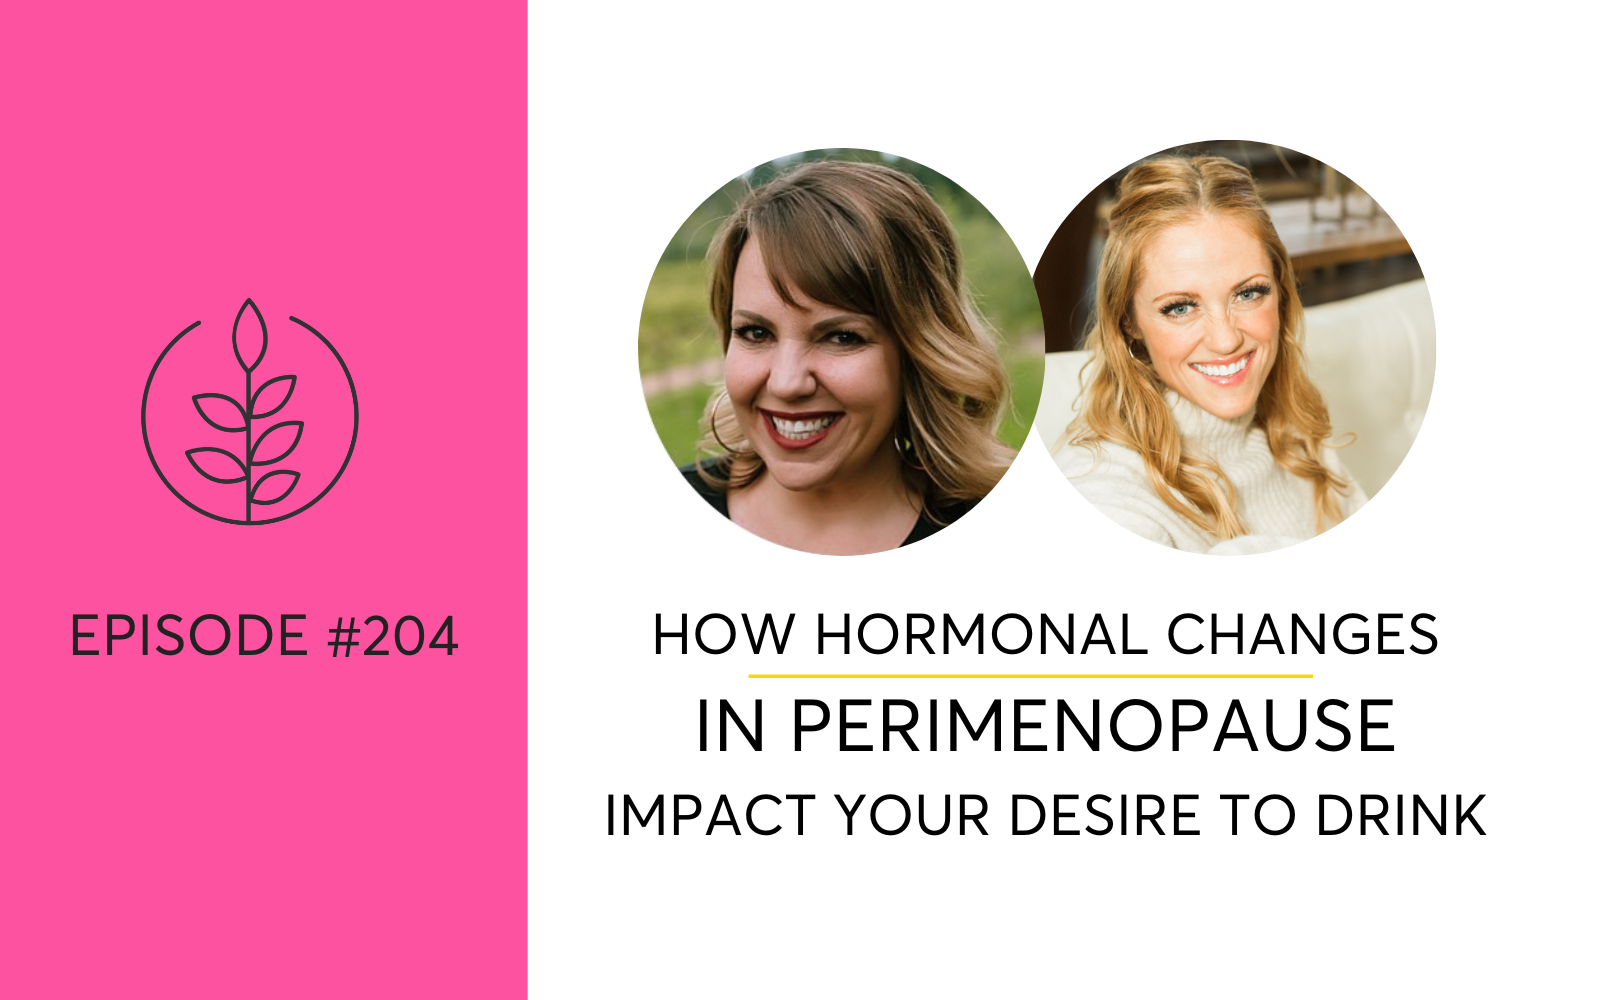 How Hormonal Changes In Perimenopause Can Fuel Your Desire To Drink